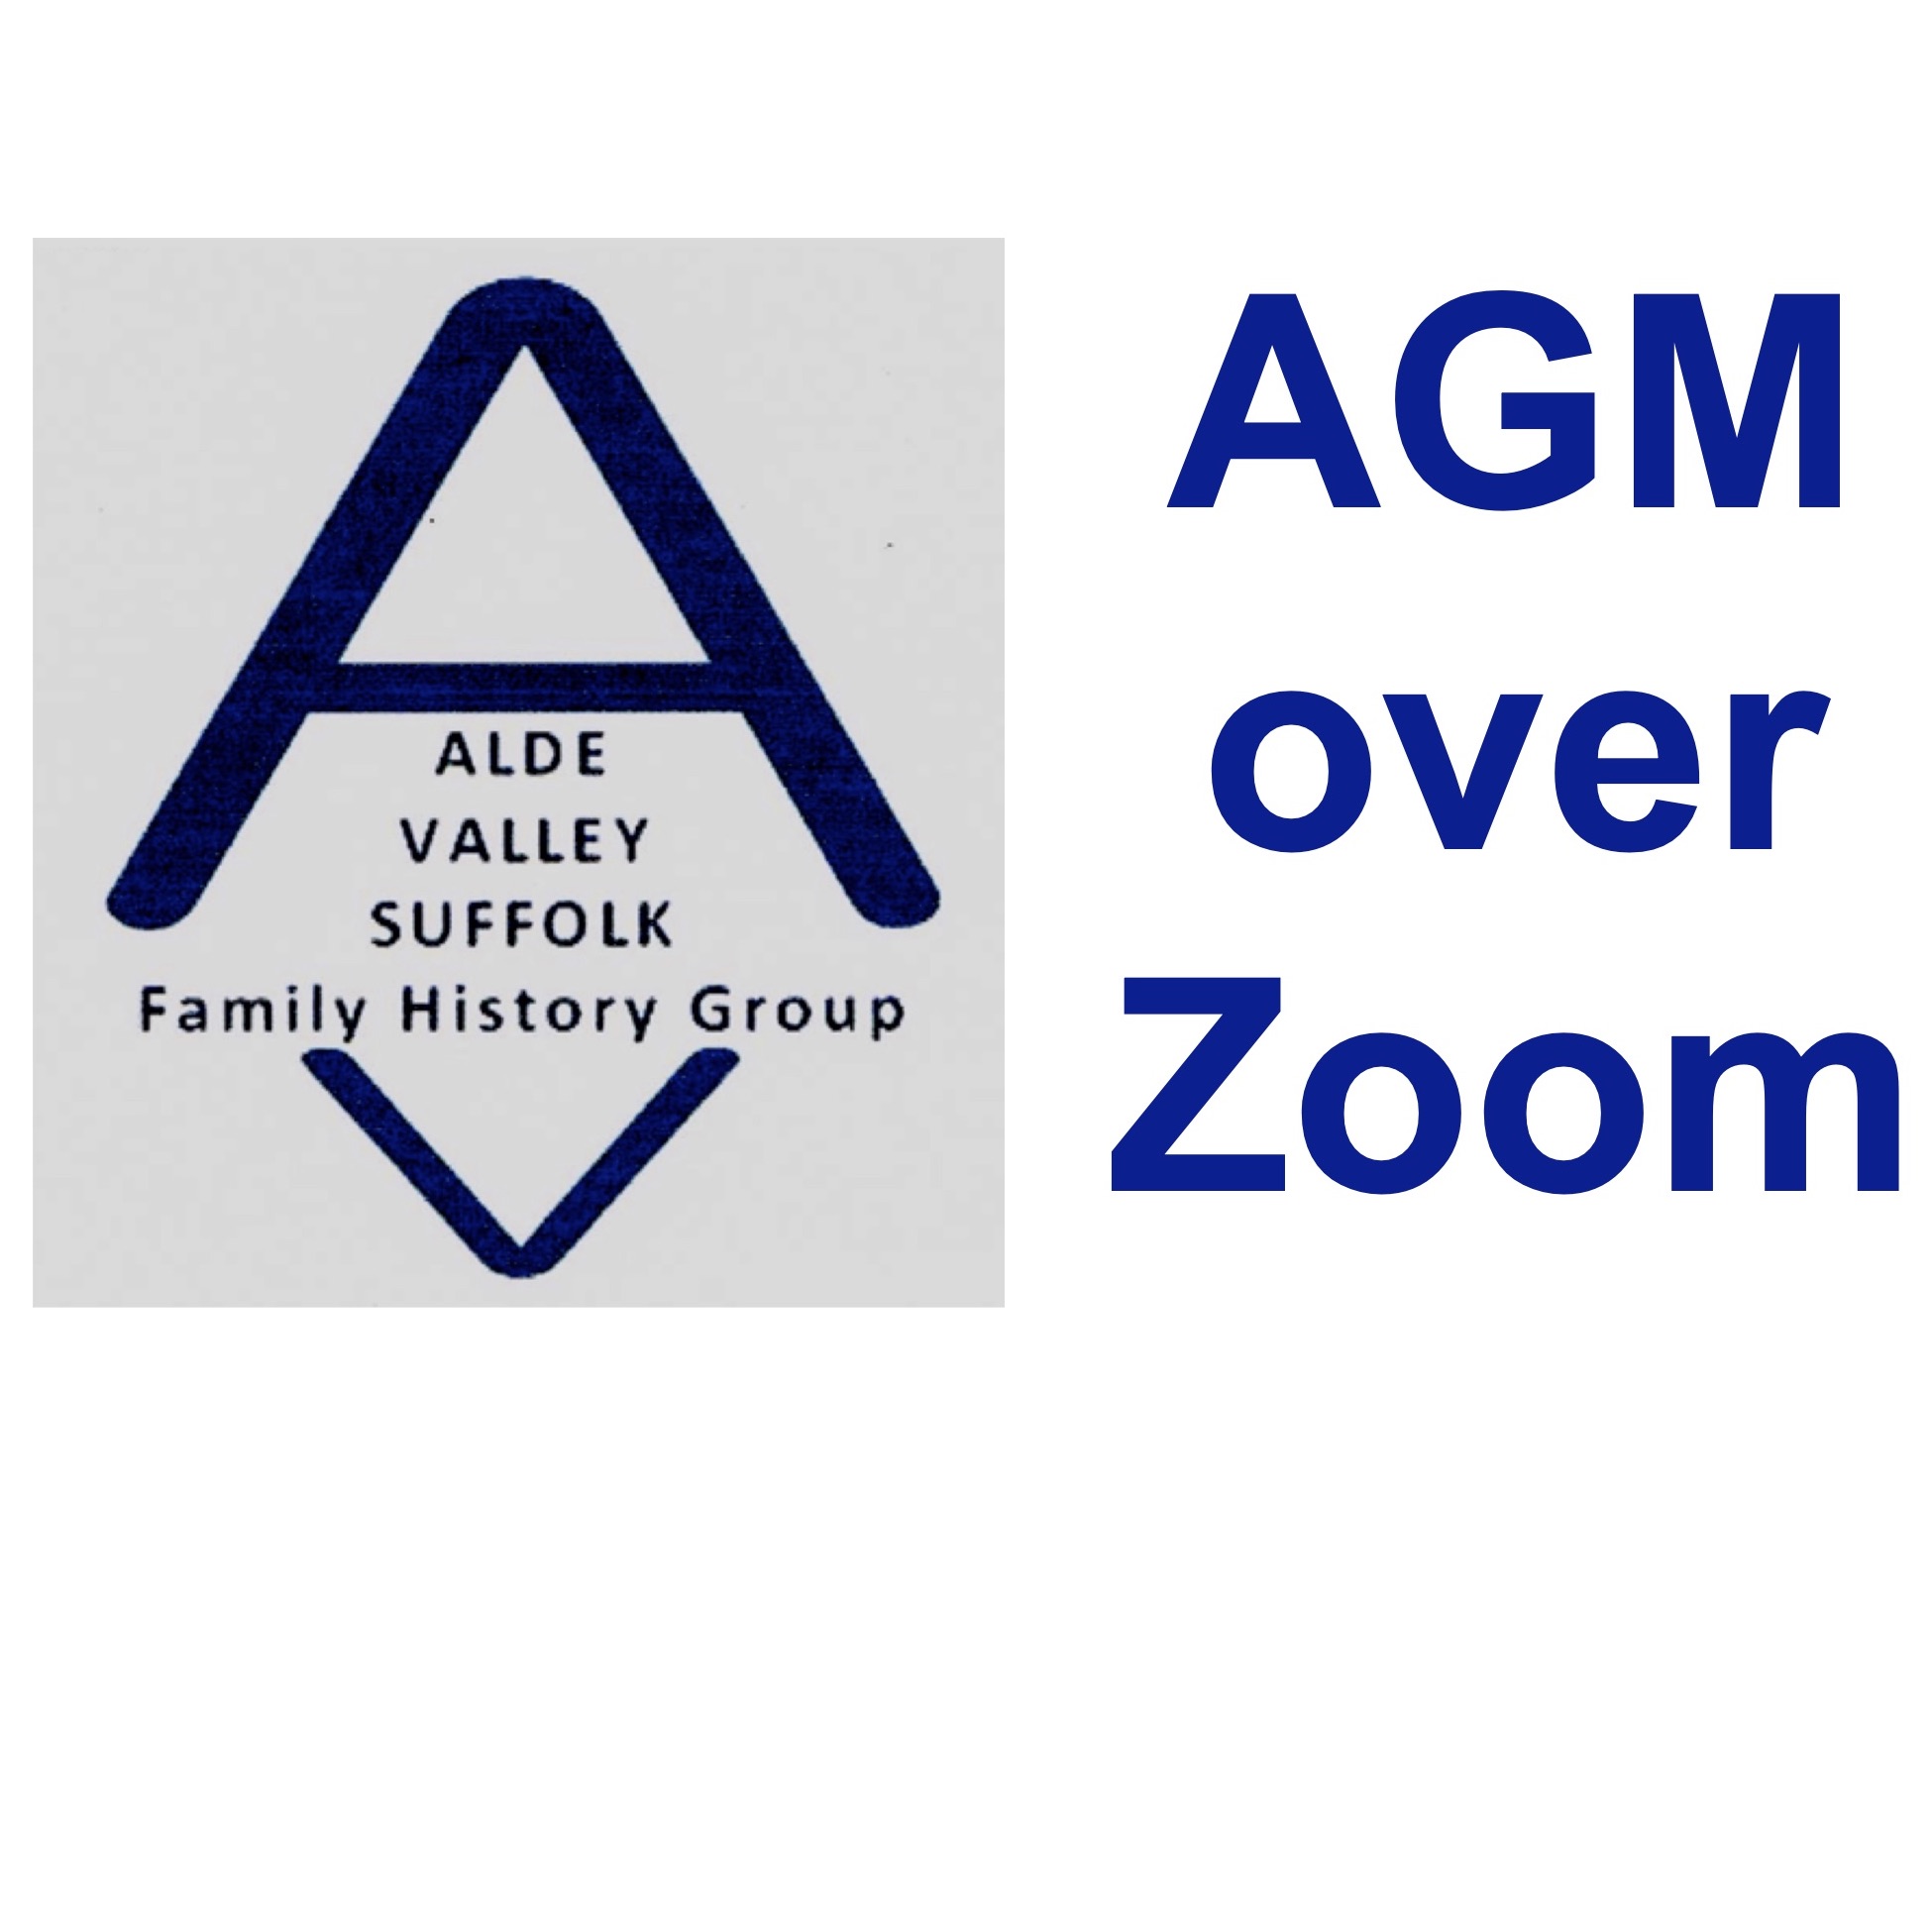 Online 2020 AGM over Zoom